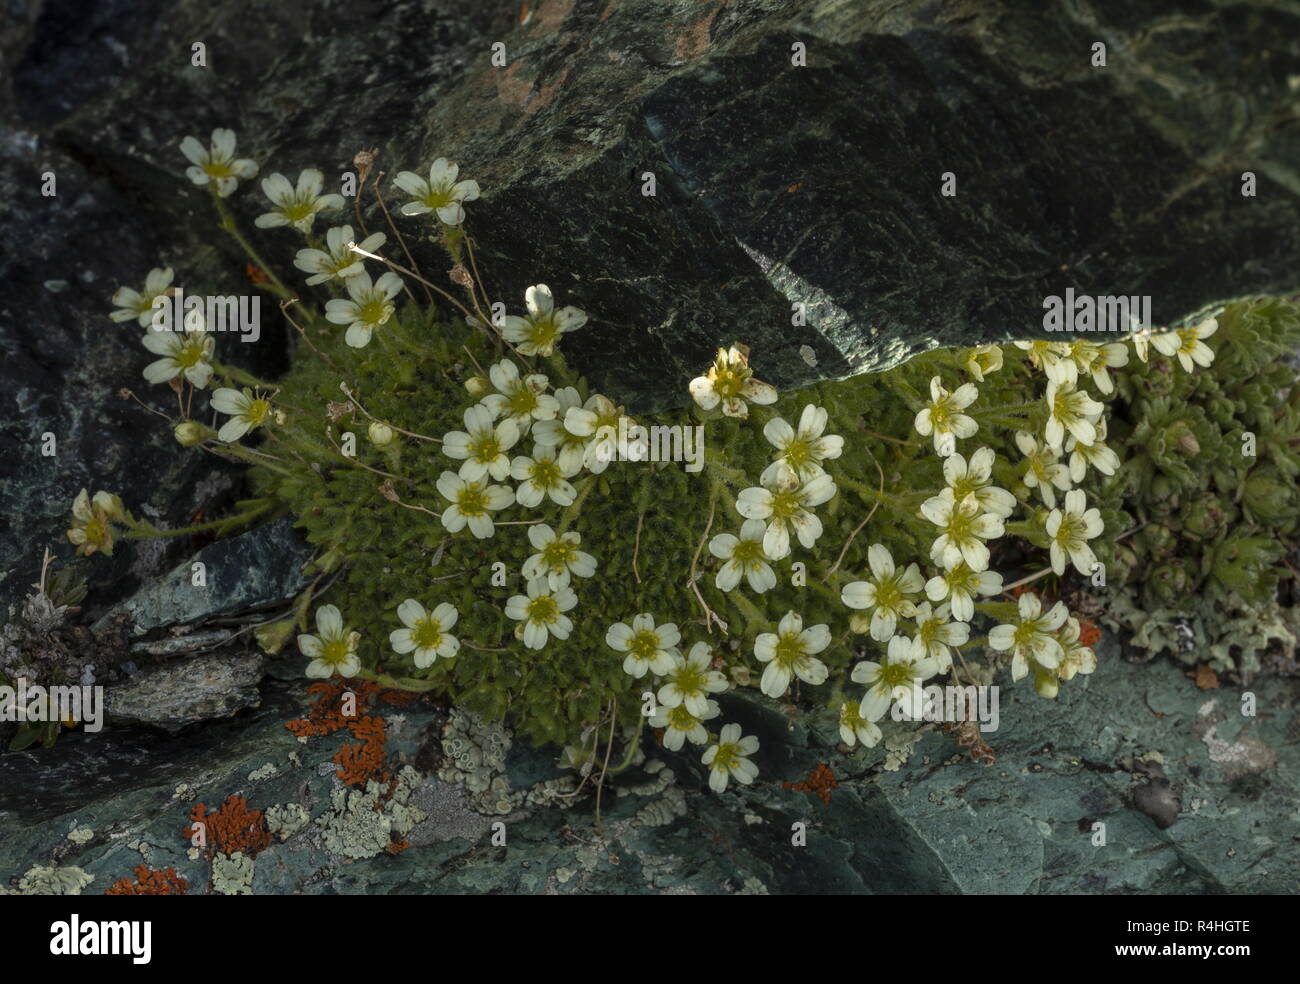 Mossy saxifrage, Saxifraga muscoides,i in flower at high altitude, Matterhorn, Swiss Alps. Stock Photo